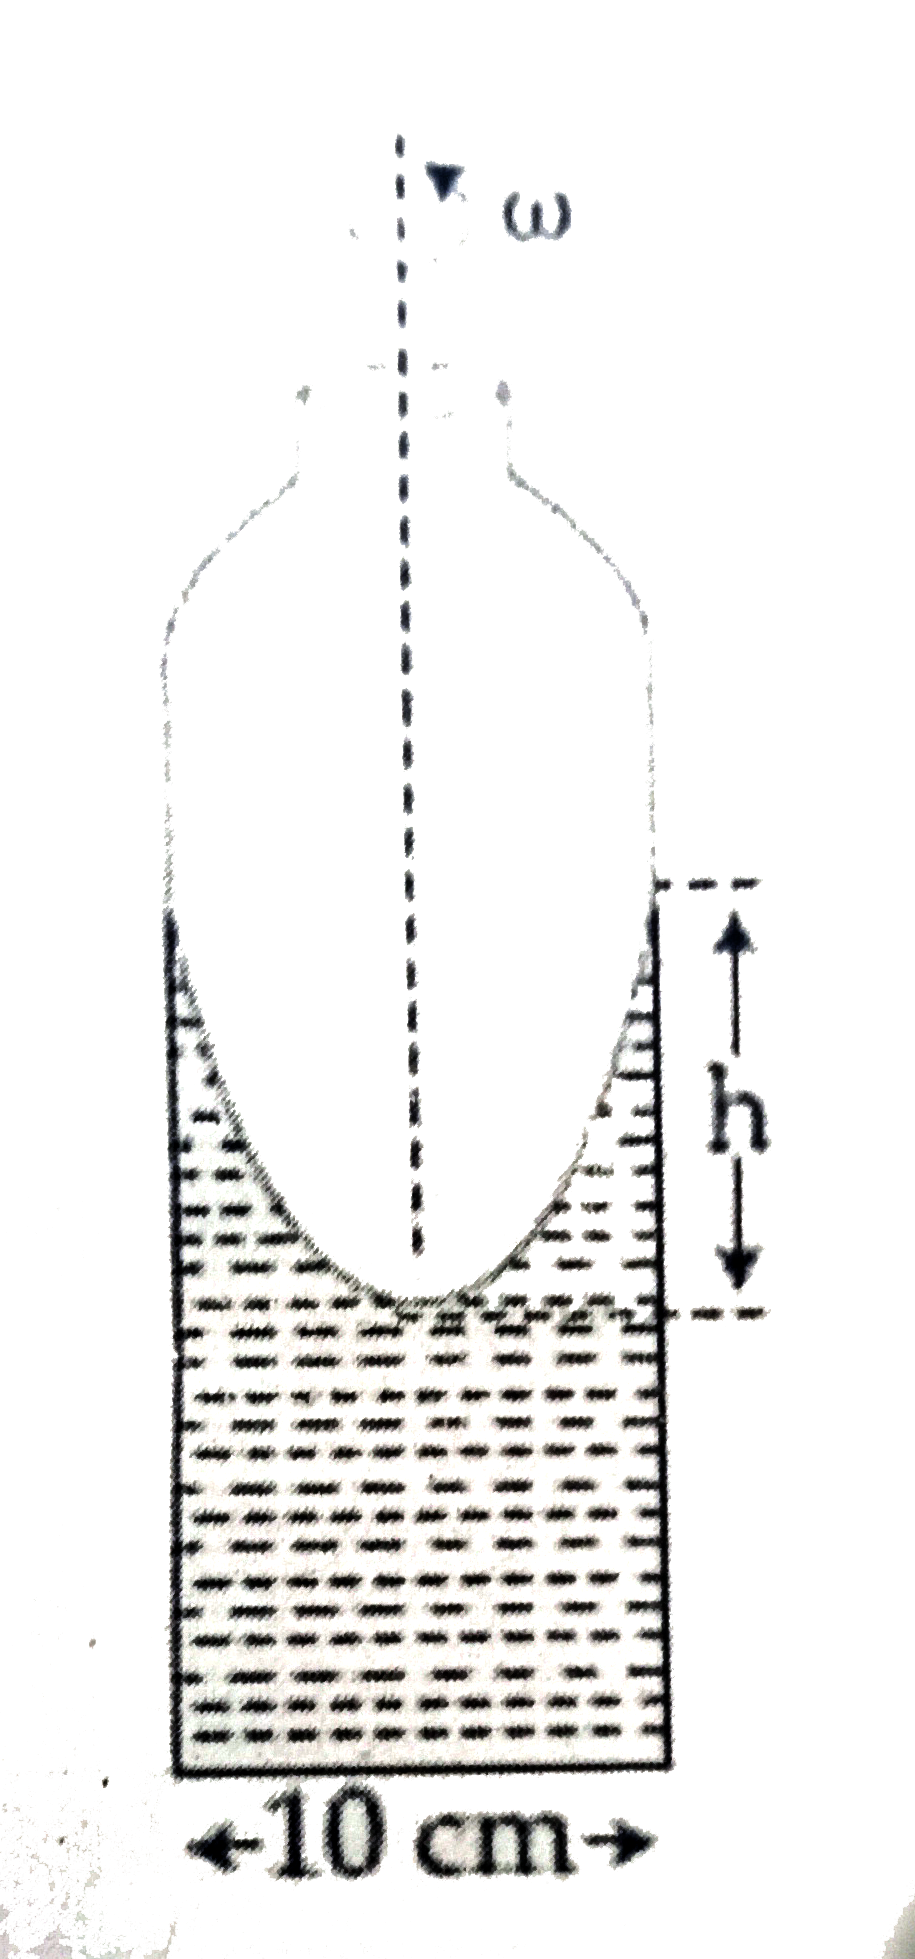 A cylindrical vessel containing  a liquid  is rotated  about its axis so that the liquid  rises  at its sides as shown in the figure  . The radius of vessel is 5 cm and the angular  speed  of rotation is  omega rad s^(-1). The difference  in the height  , h ( in cm ) of liquid  at the centre  of vessel and at the side will be :